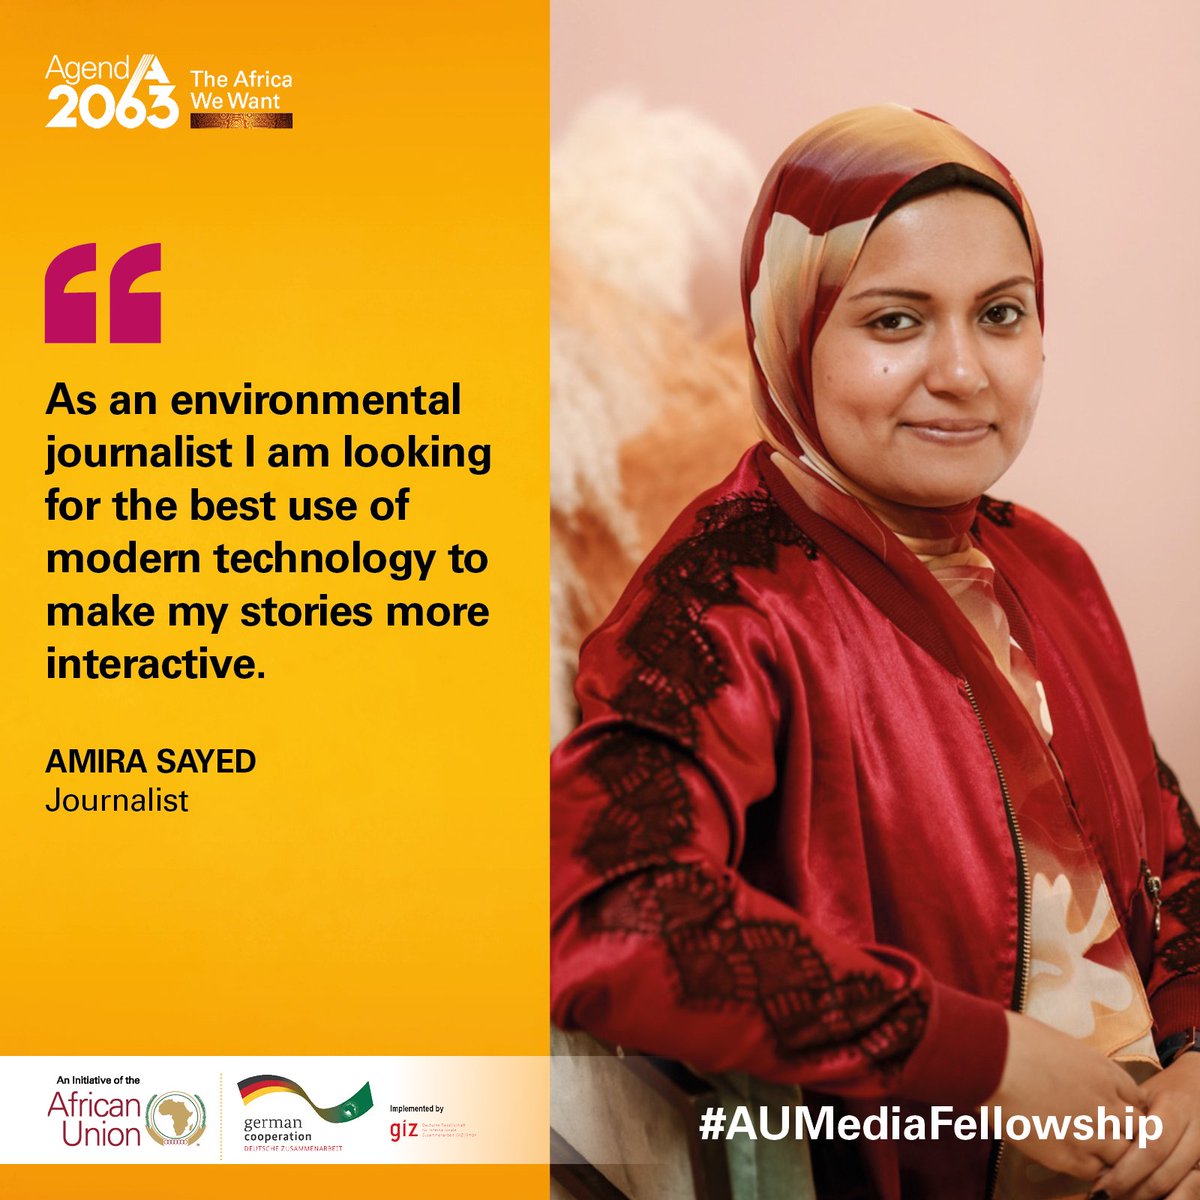 Proud to present @AmiraSa24441424, #AUMediaFellow from Egypt with a focus on environmental matters. Stay tuned for her stories on this vital #Agenda2063 theme and the #AUMediaFellowship!
#FellowFriday @African_Union @AfricanUnion